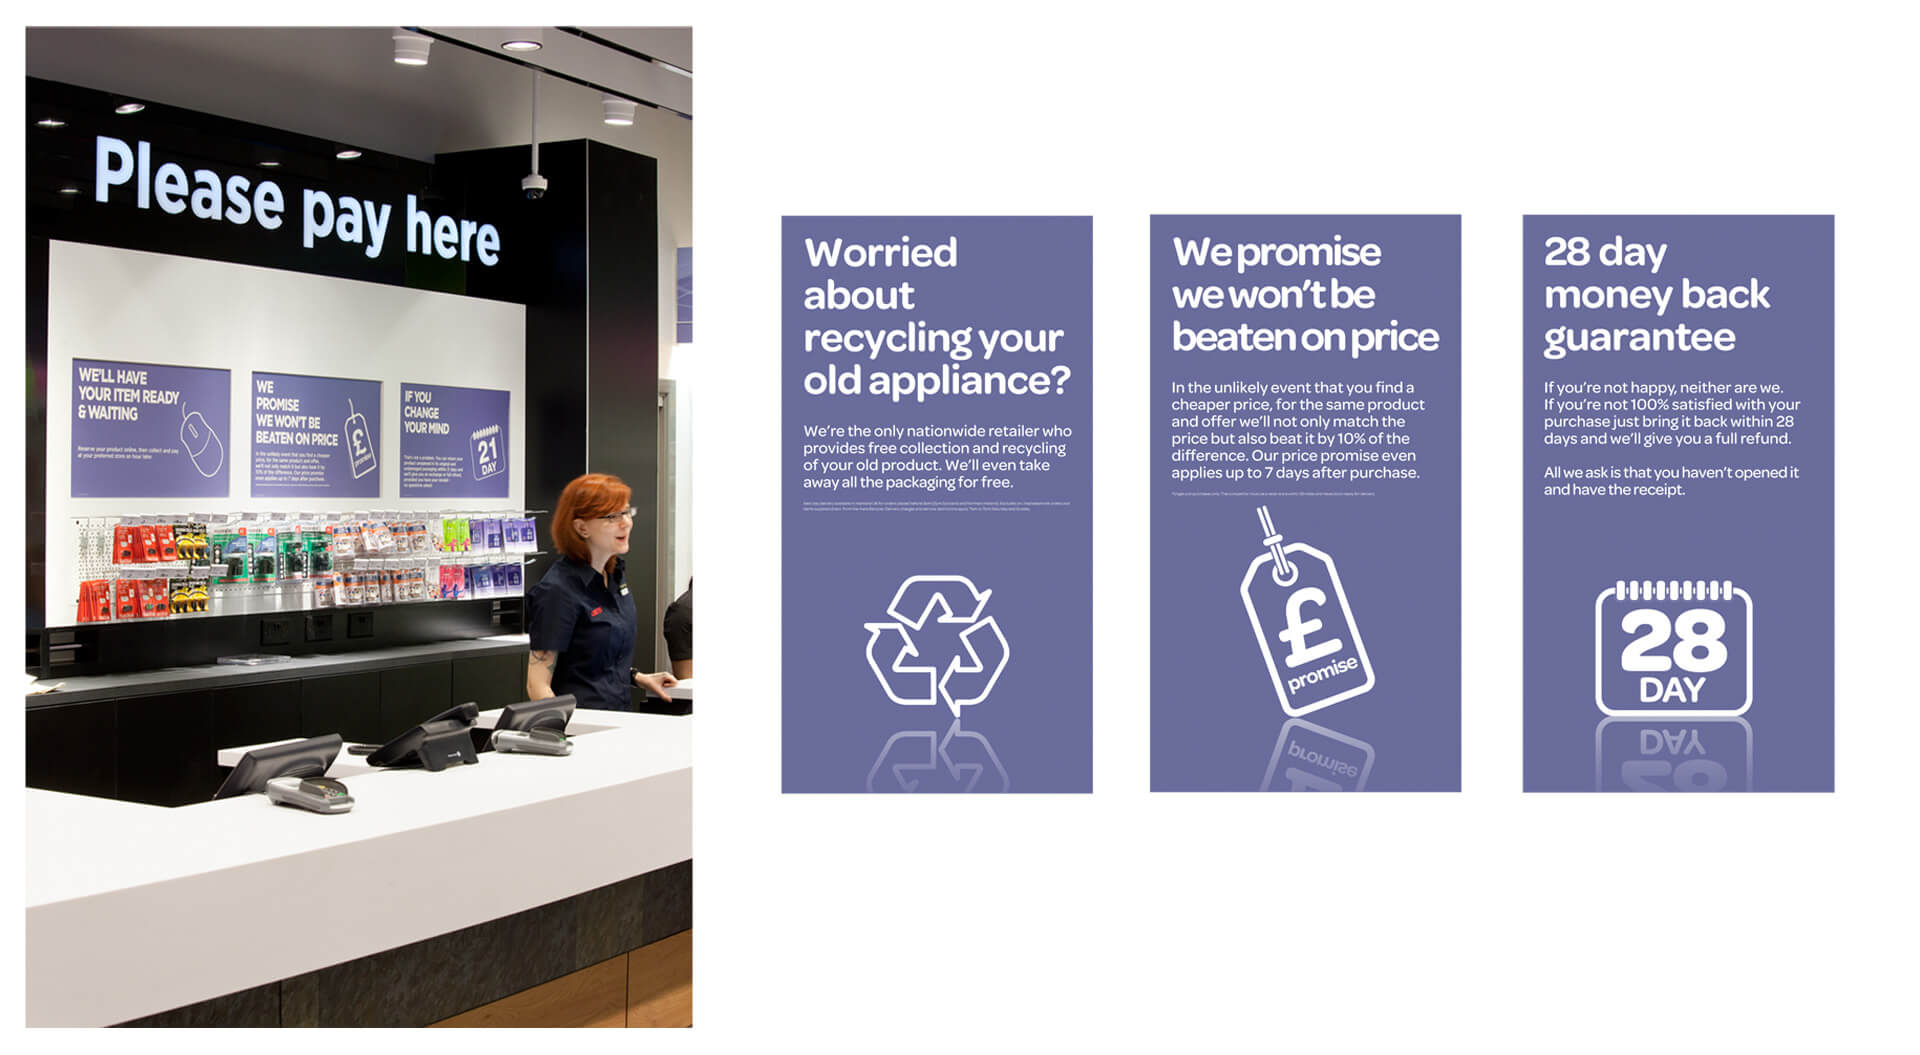 Currys PC World point of sale communications at cash desk